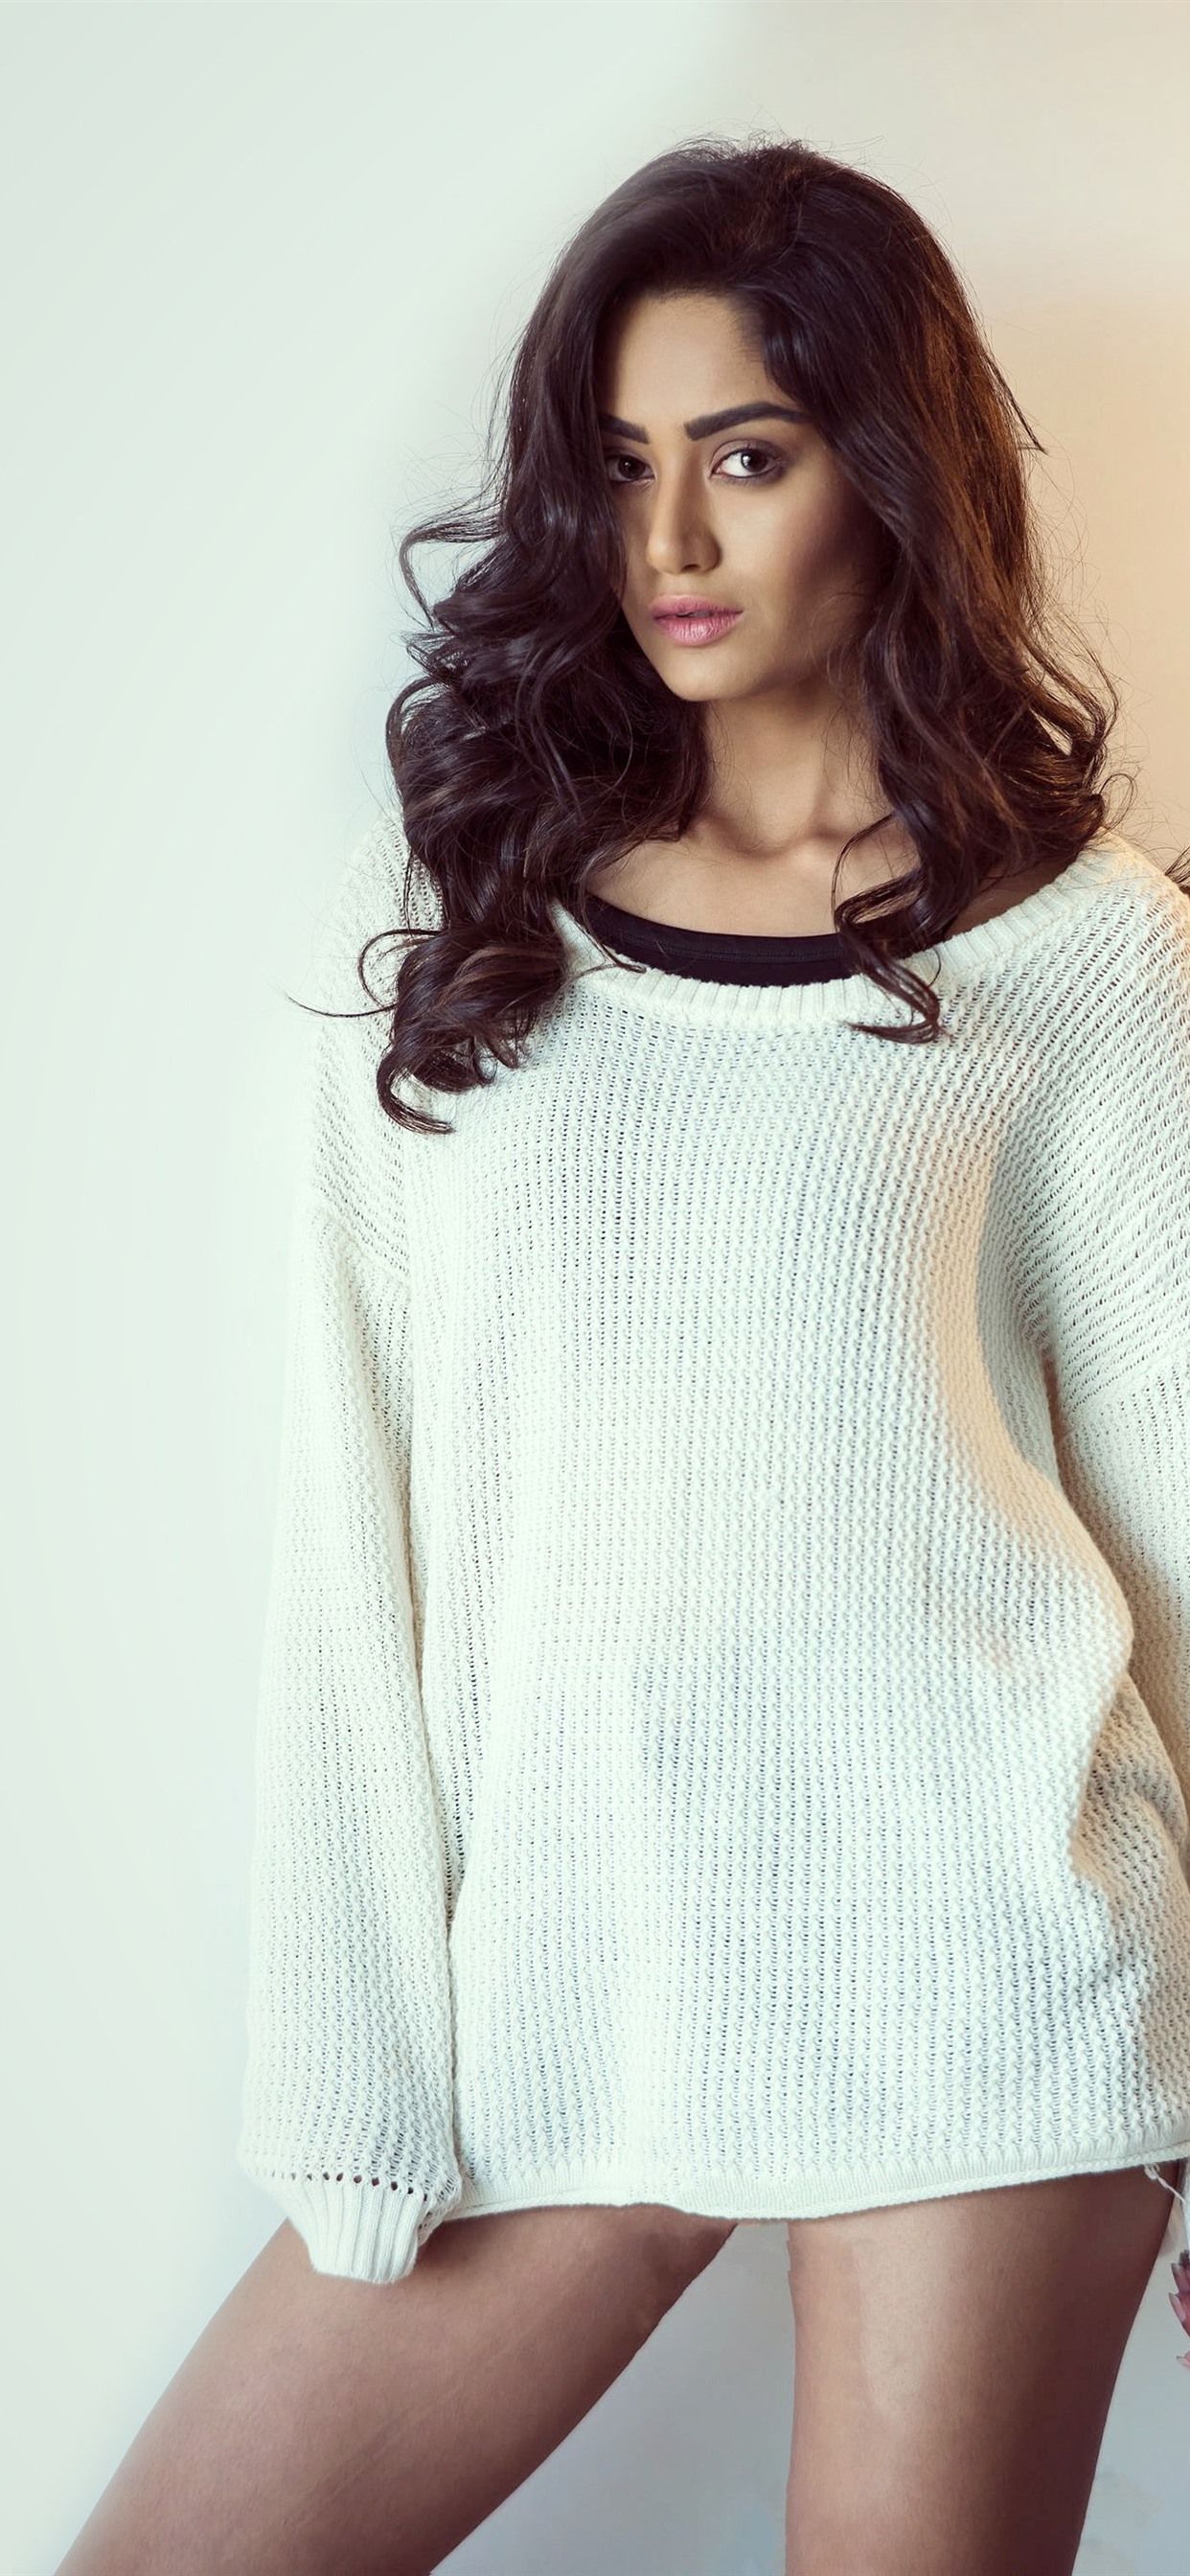 Curly Hair Girl, White Sweater, 1242x2688 IPhone 11 Pro XS